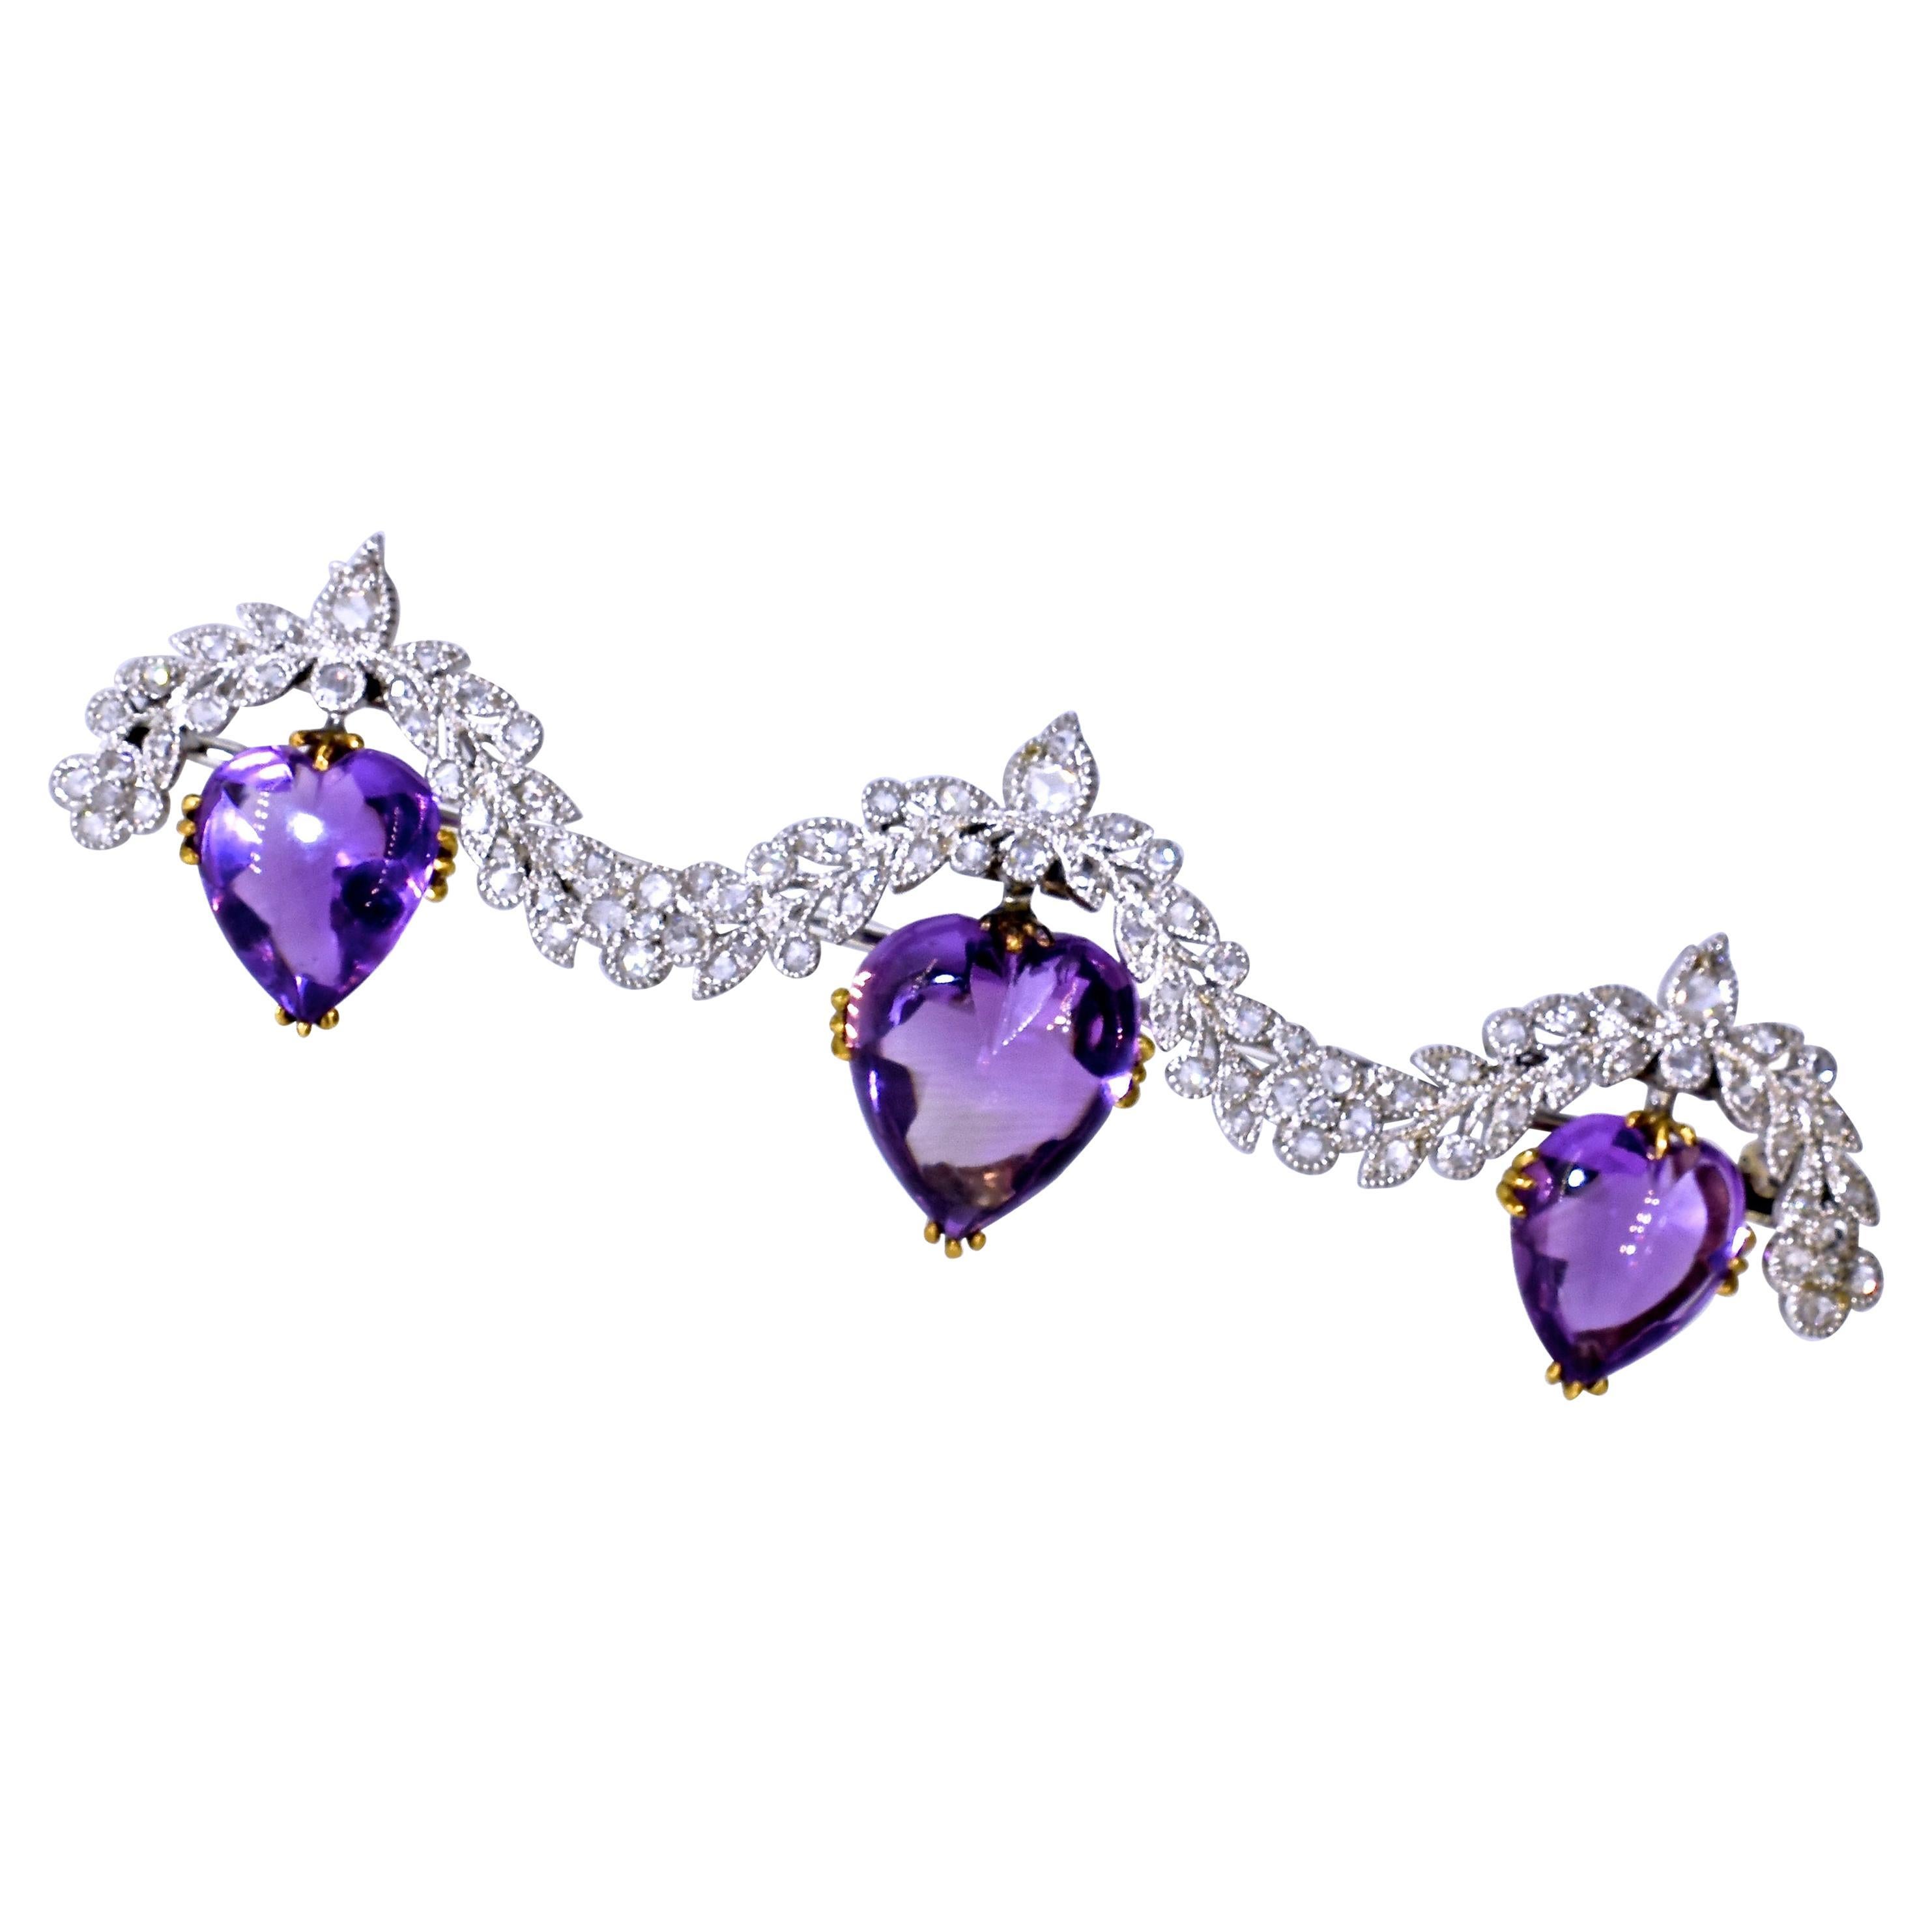 Antique heart shaped, buff-topped natural amethysts are suspended from a platinum and rose cut diamond garland.  The natural 3 amethysts are prong set in 18k yellow gold.  The platinum and diamond garland is well done exhibiting fine early 20th